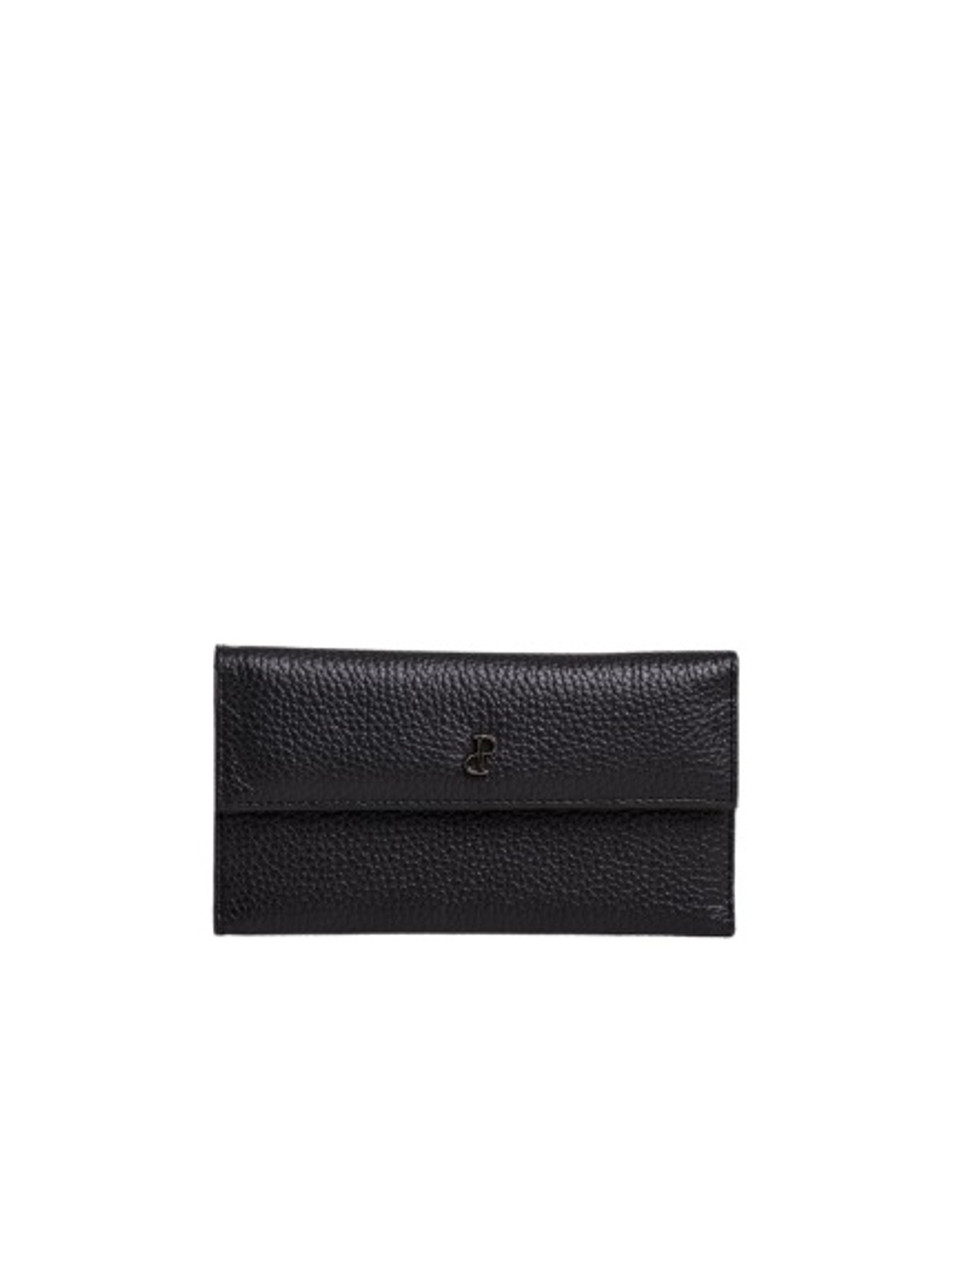 100 percent authentic Black leather GUCCI WALLET